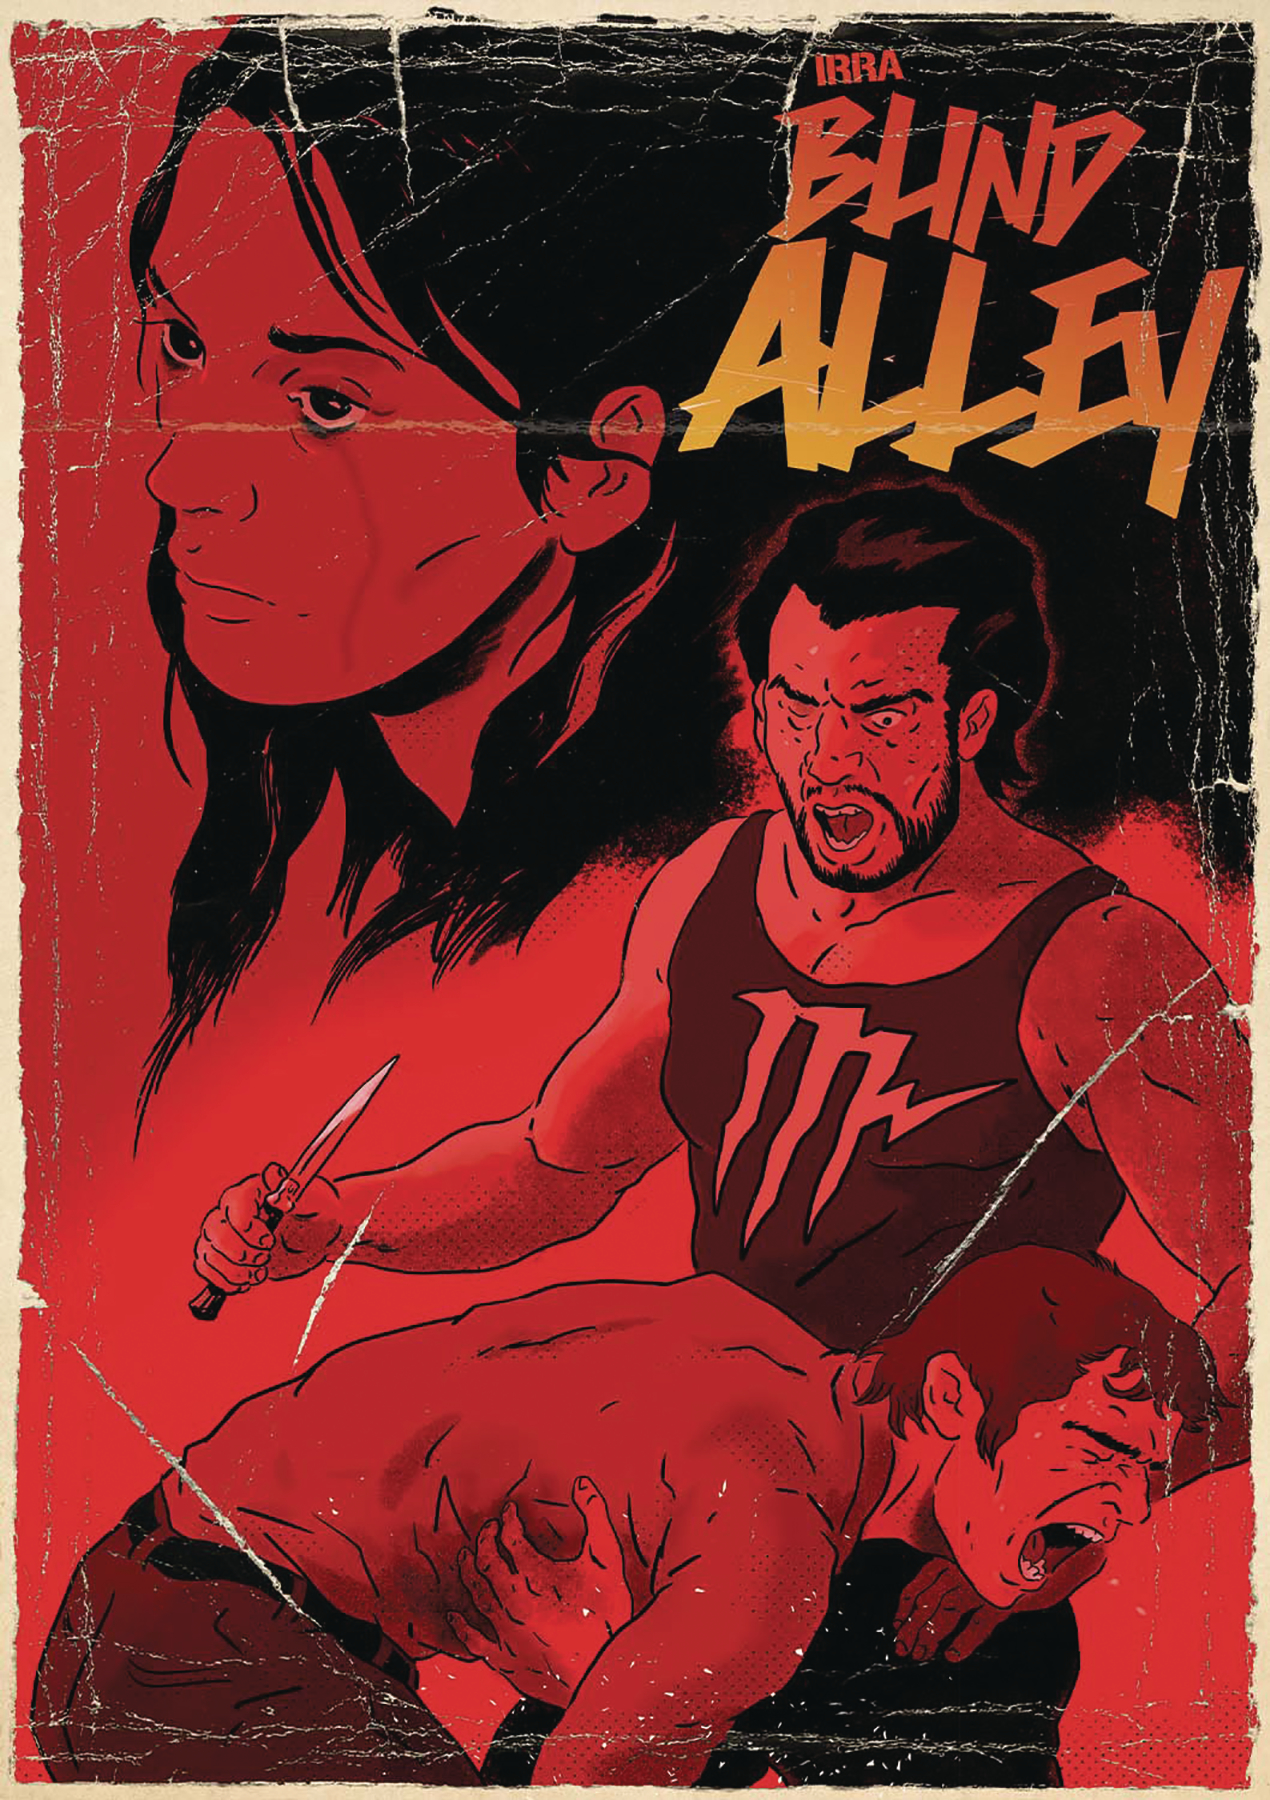 Blind Alley #5 Cover A Irra (Mature) (Of 5)